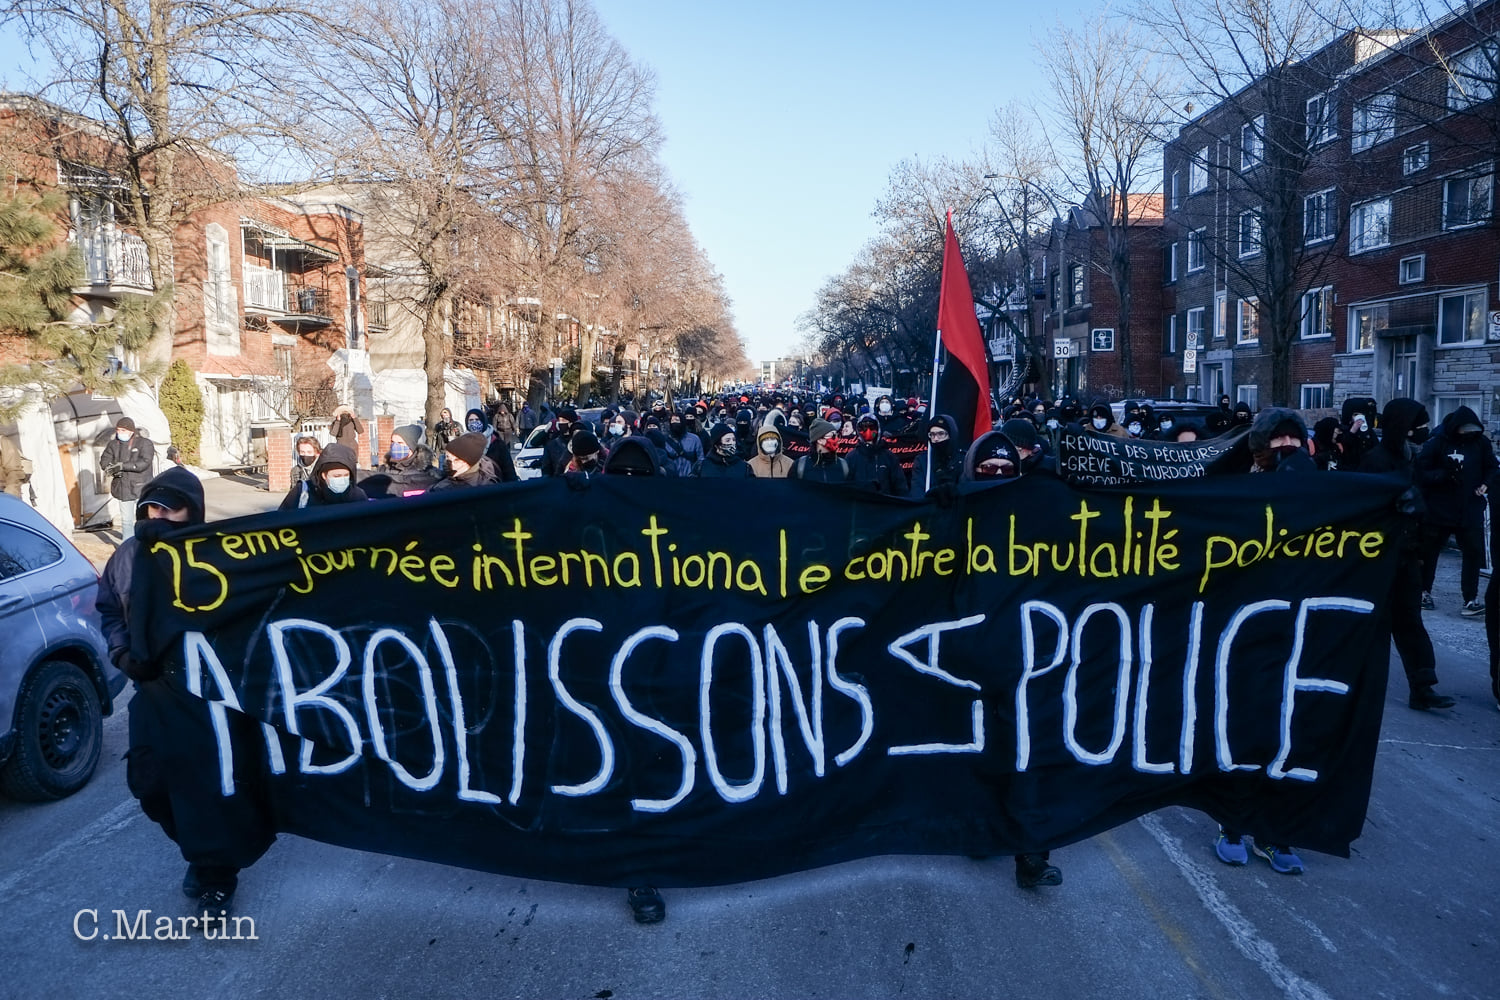 Communiqué of the COBP : 25th Annual International Day Against Police Brutality